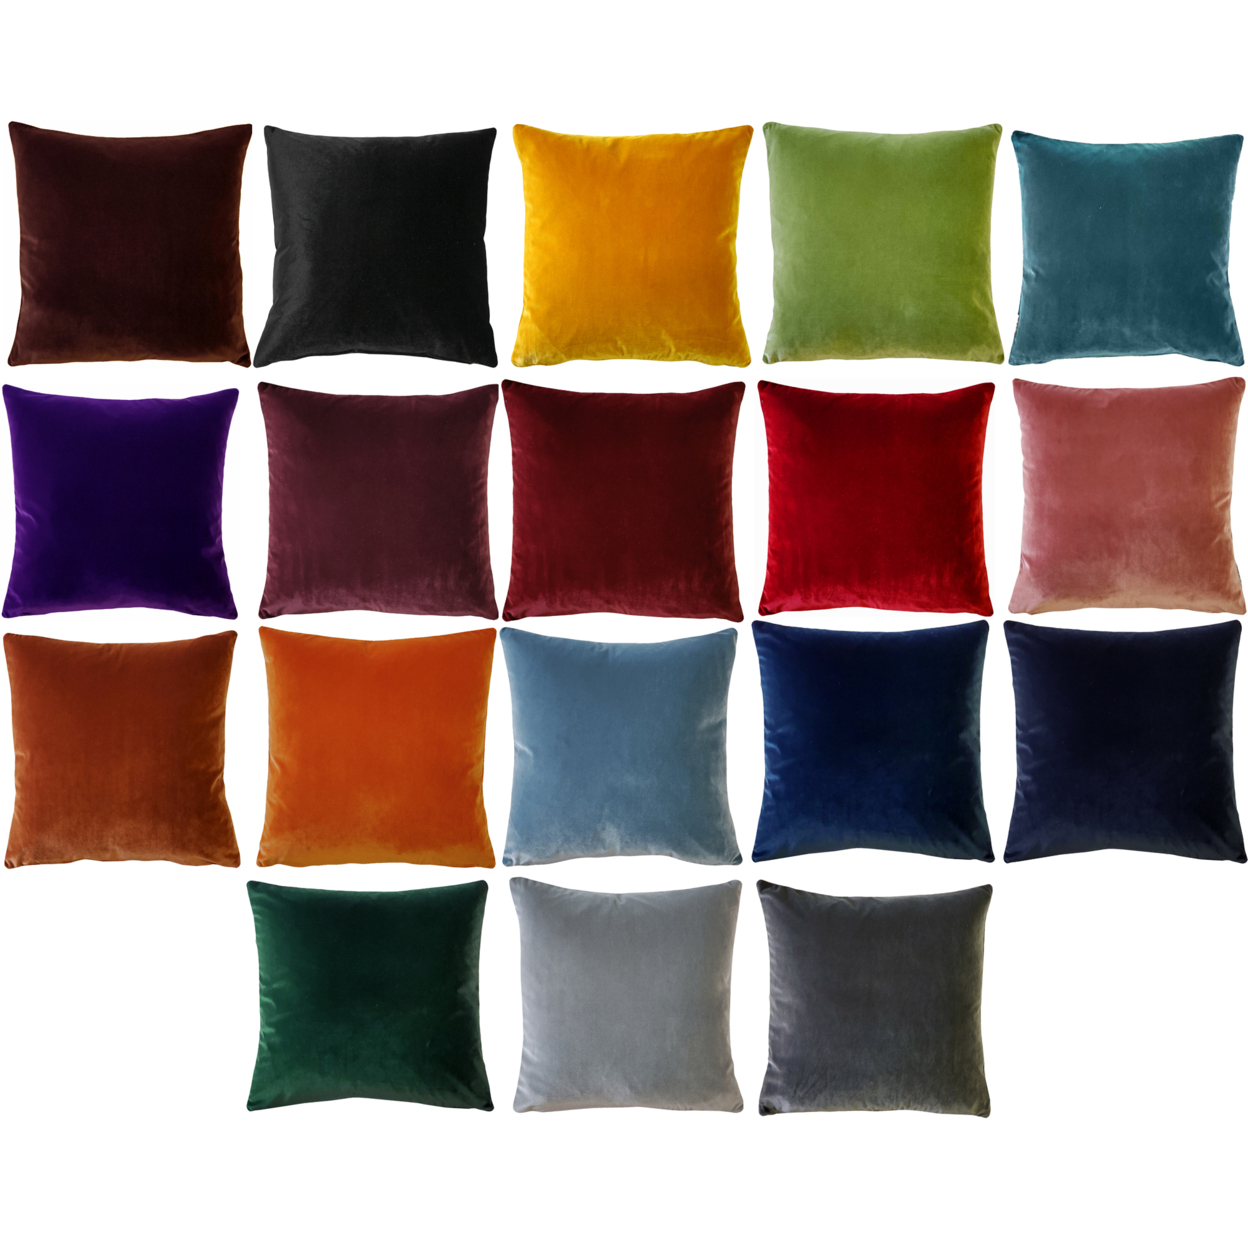 Castello Velvet Throw Pillows, Complete Pillow With Polyfill Pillow Insert (18 Colors, 3 Sizes) - Wine, 12x20